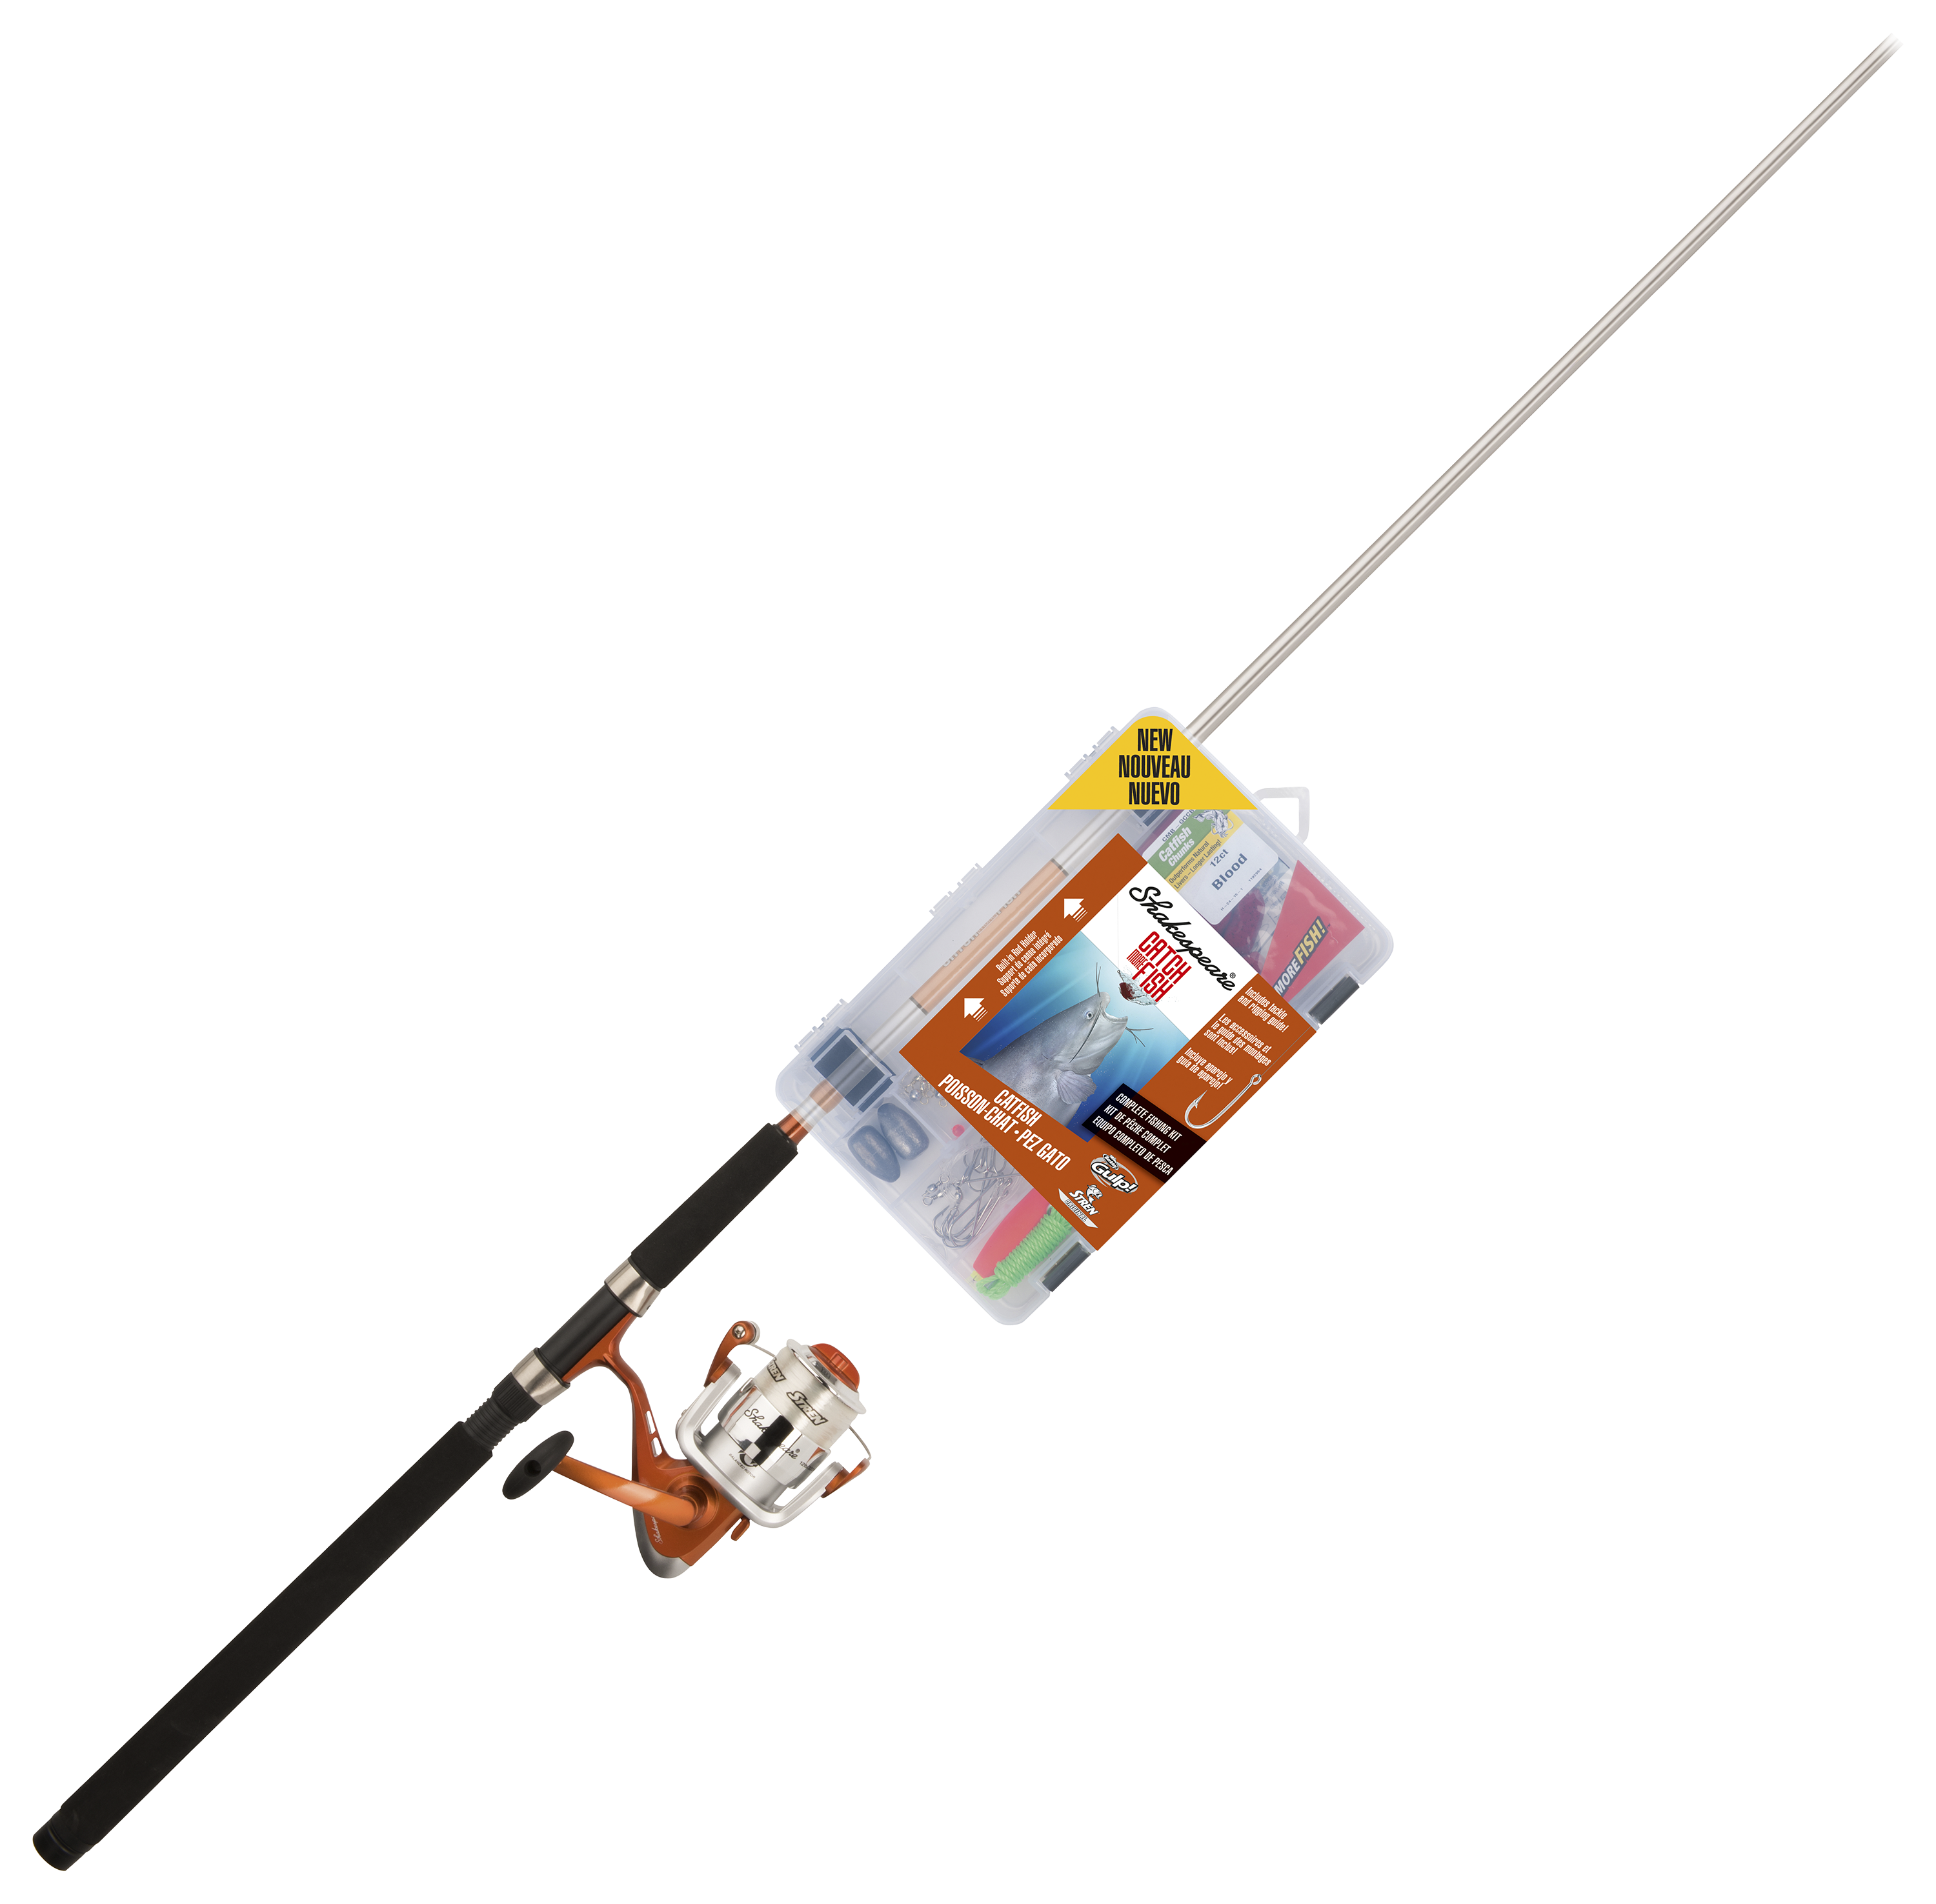 Shakespeare Catch More Fish Spinning Rod And Reel Combo For, 41% OFF